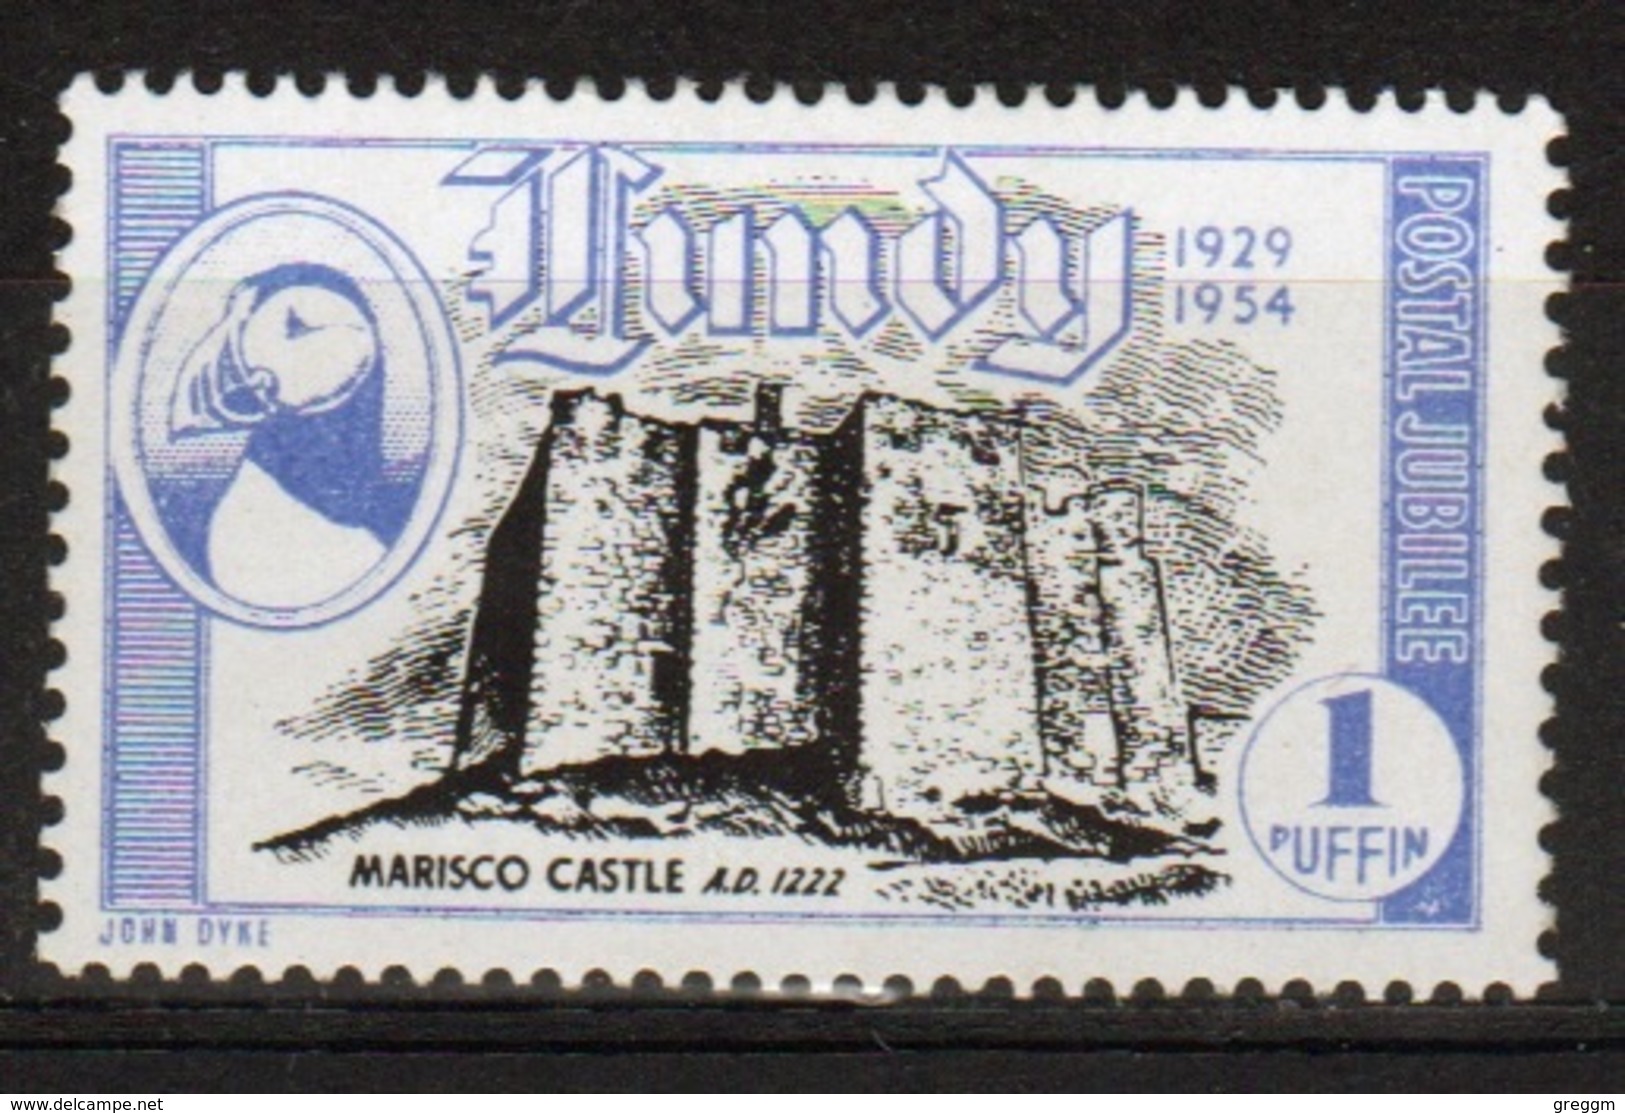 Lundy Island Single 1 Puffin Stamp 1954 Silver Jubilee Issue. - Local Issues